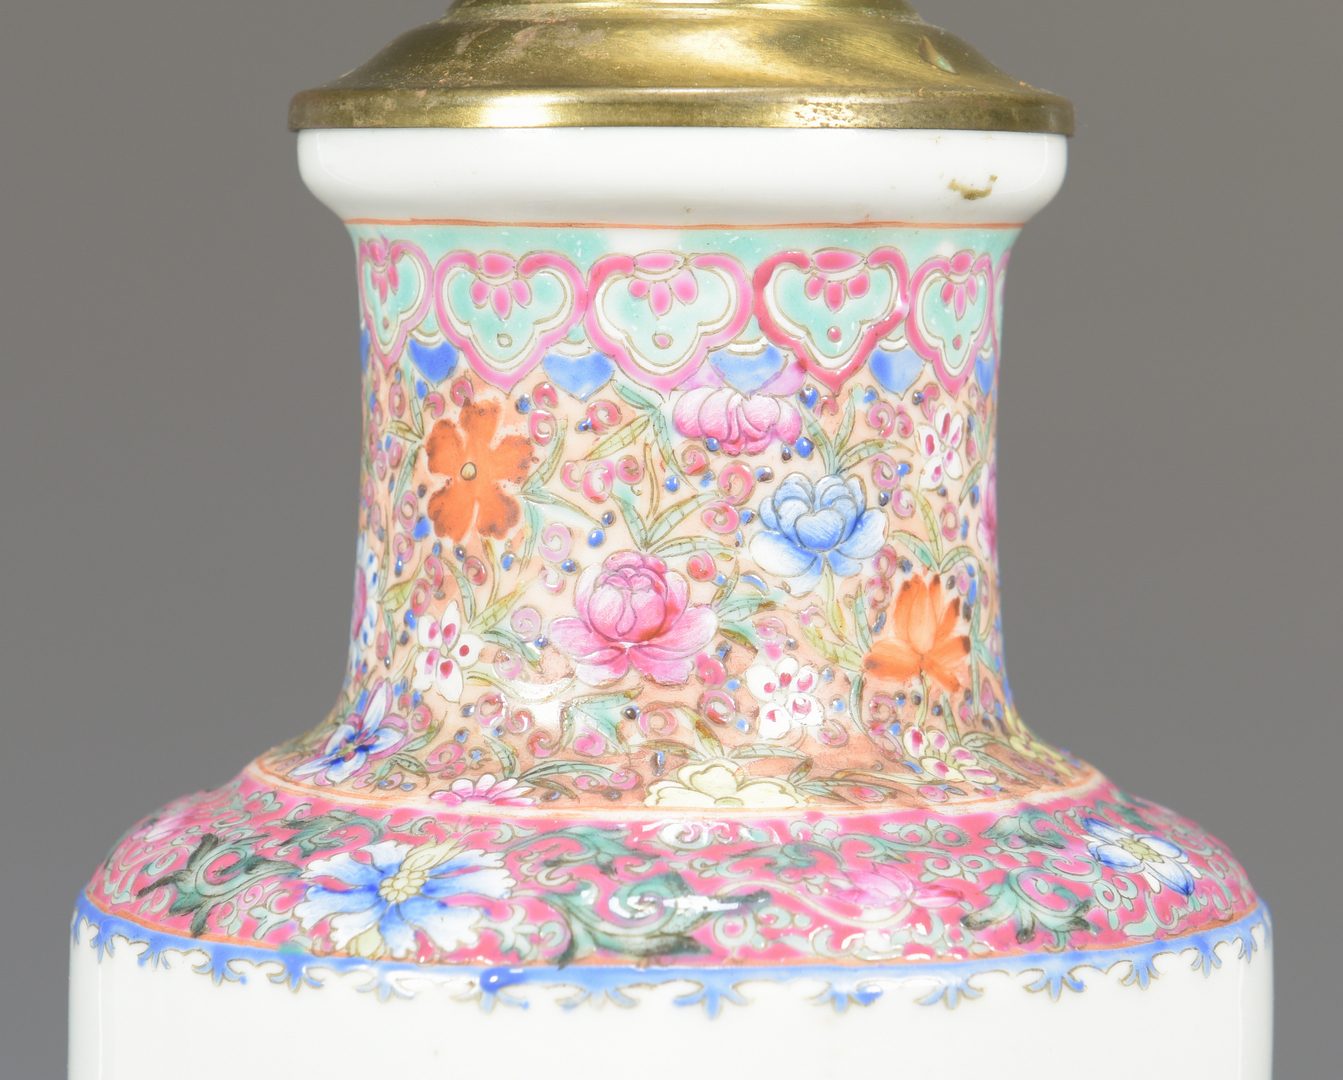 Lot 30: Chinese Famille Rose Porcelain Lamp